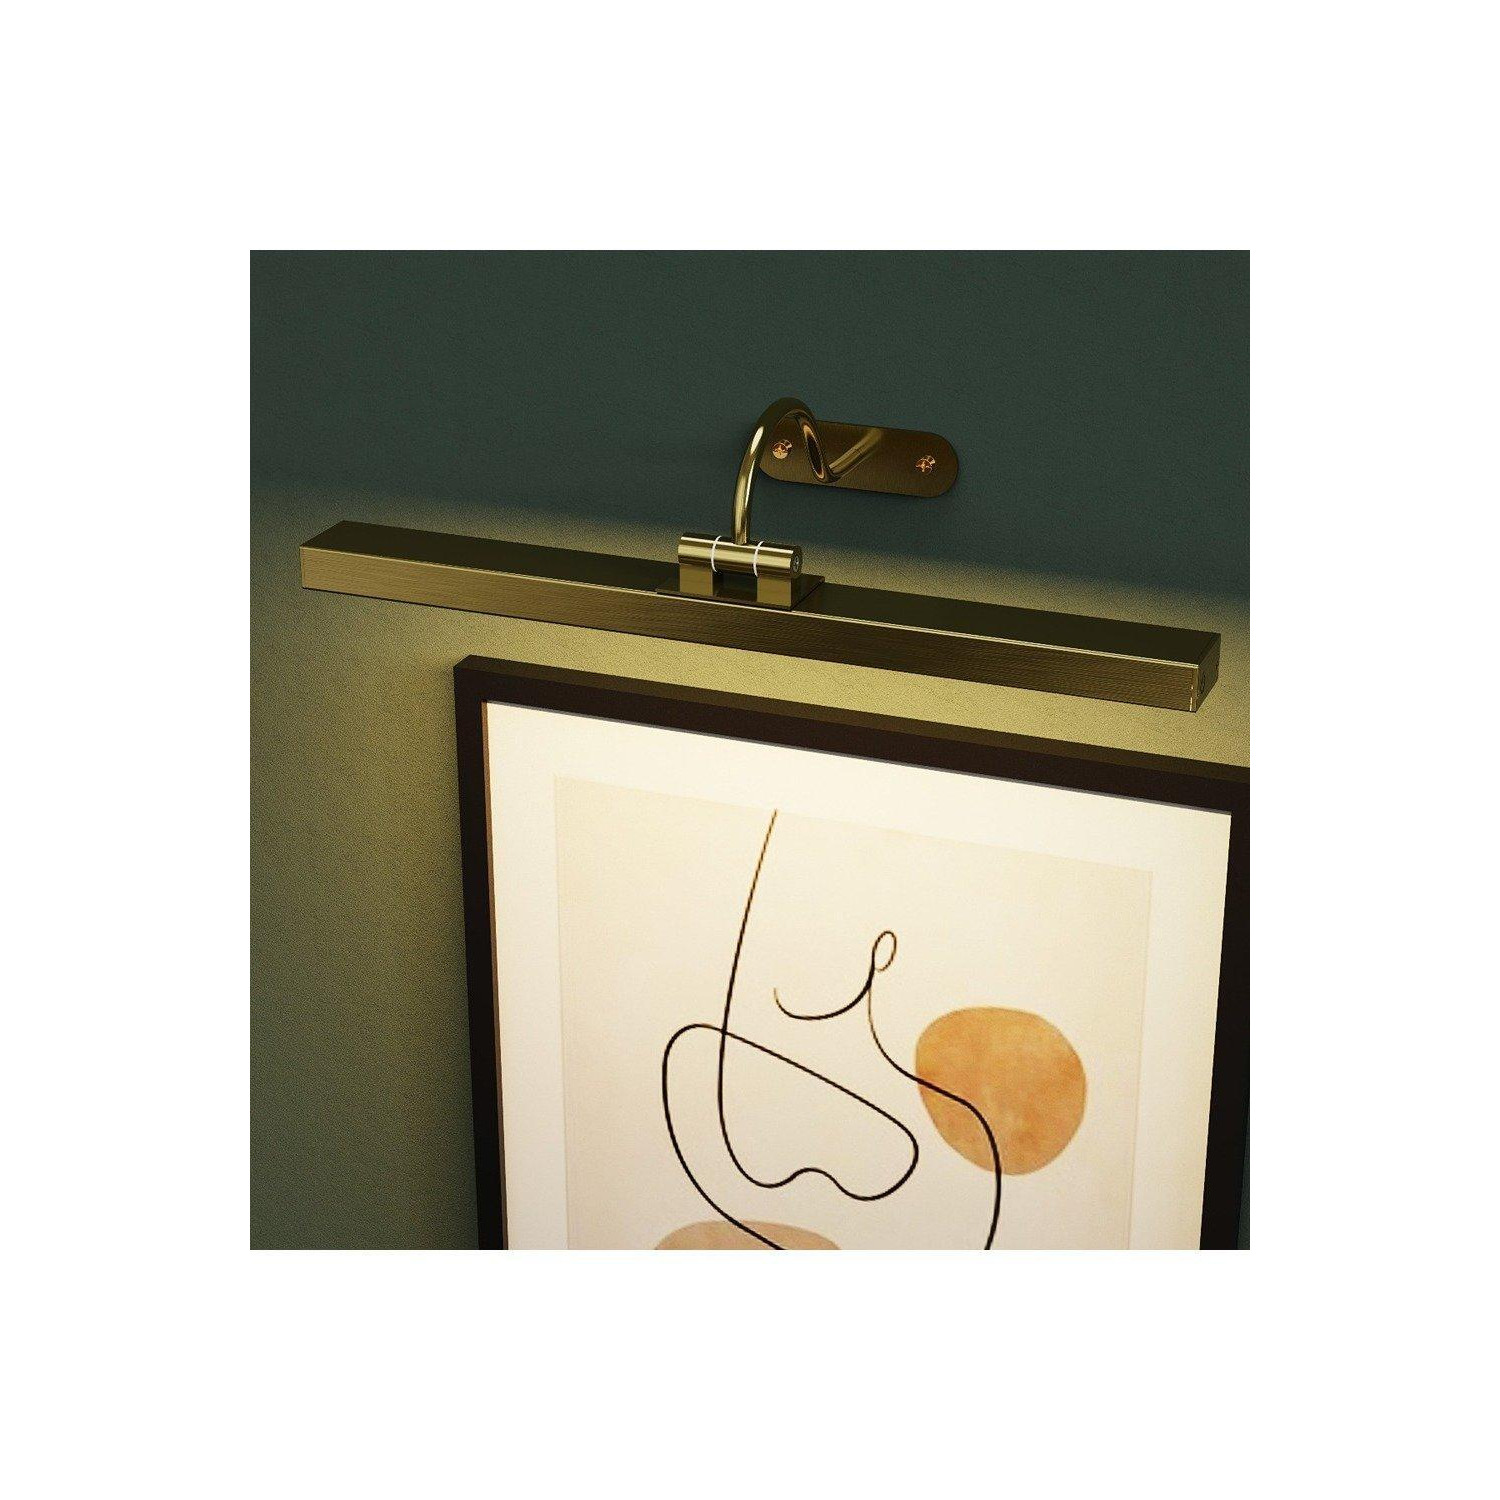 'Virgo' Curved Satin Gold LED Rechargeable Magnetic USB Over Picture Wall Light - image 1